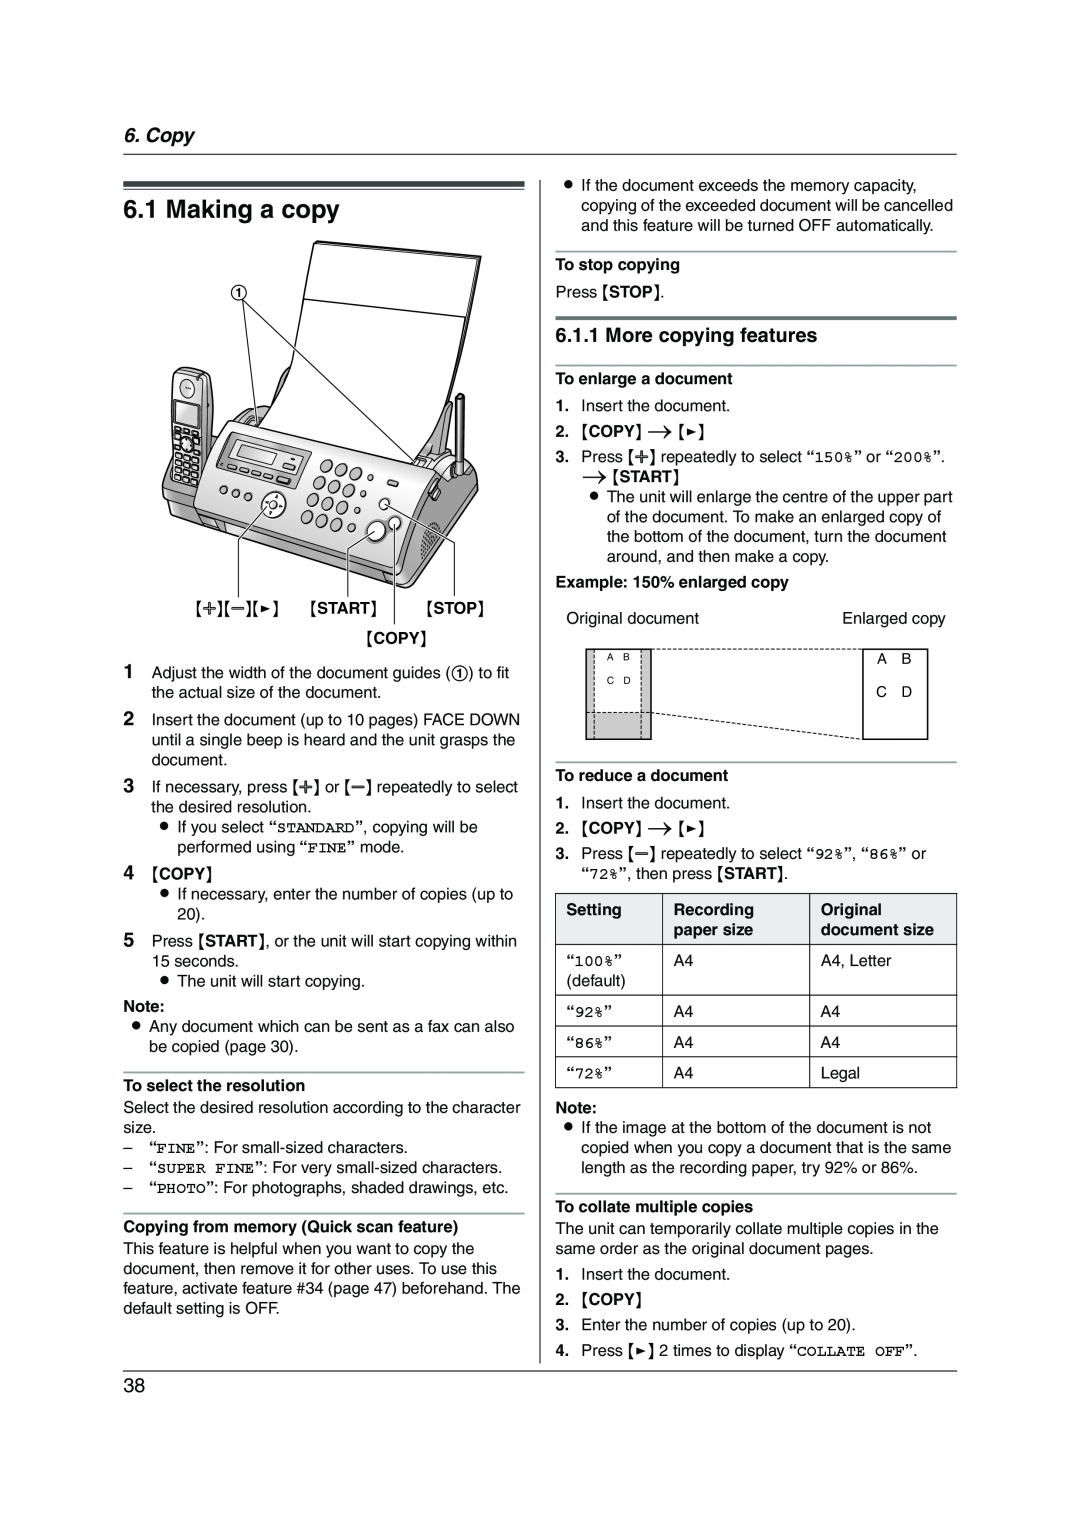 Panasonic KX-FC228HK operating instructions Making a copy, Copy, More copying features, “100%”, “92%”, “86%”, “72%” 